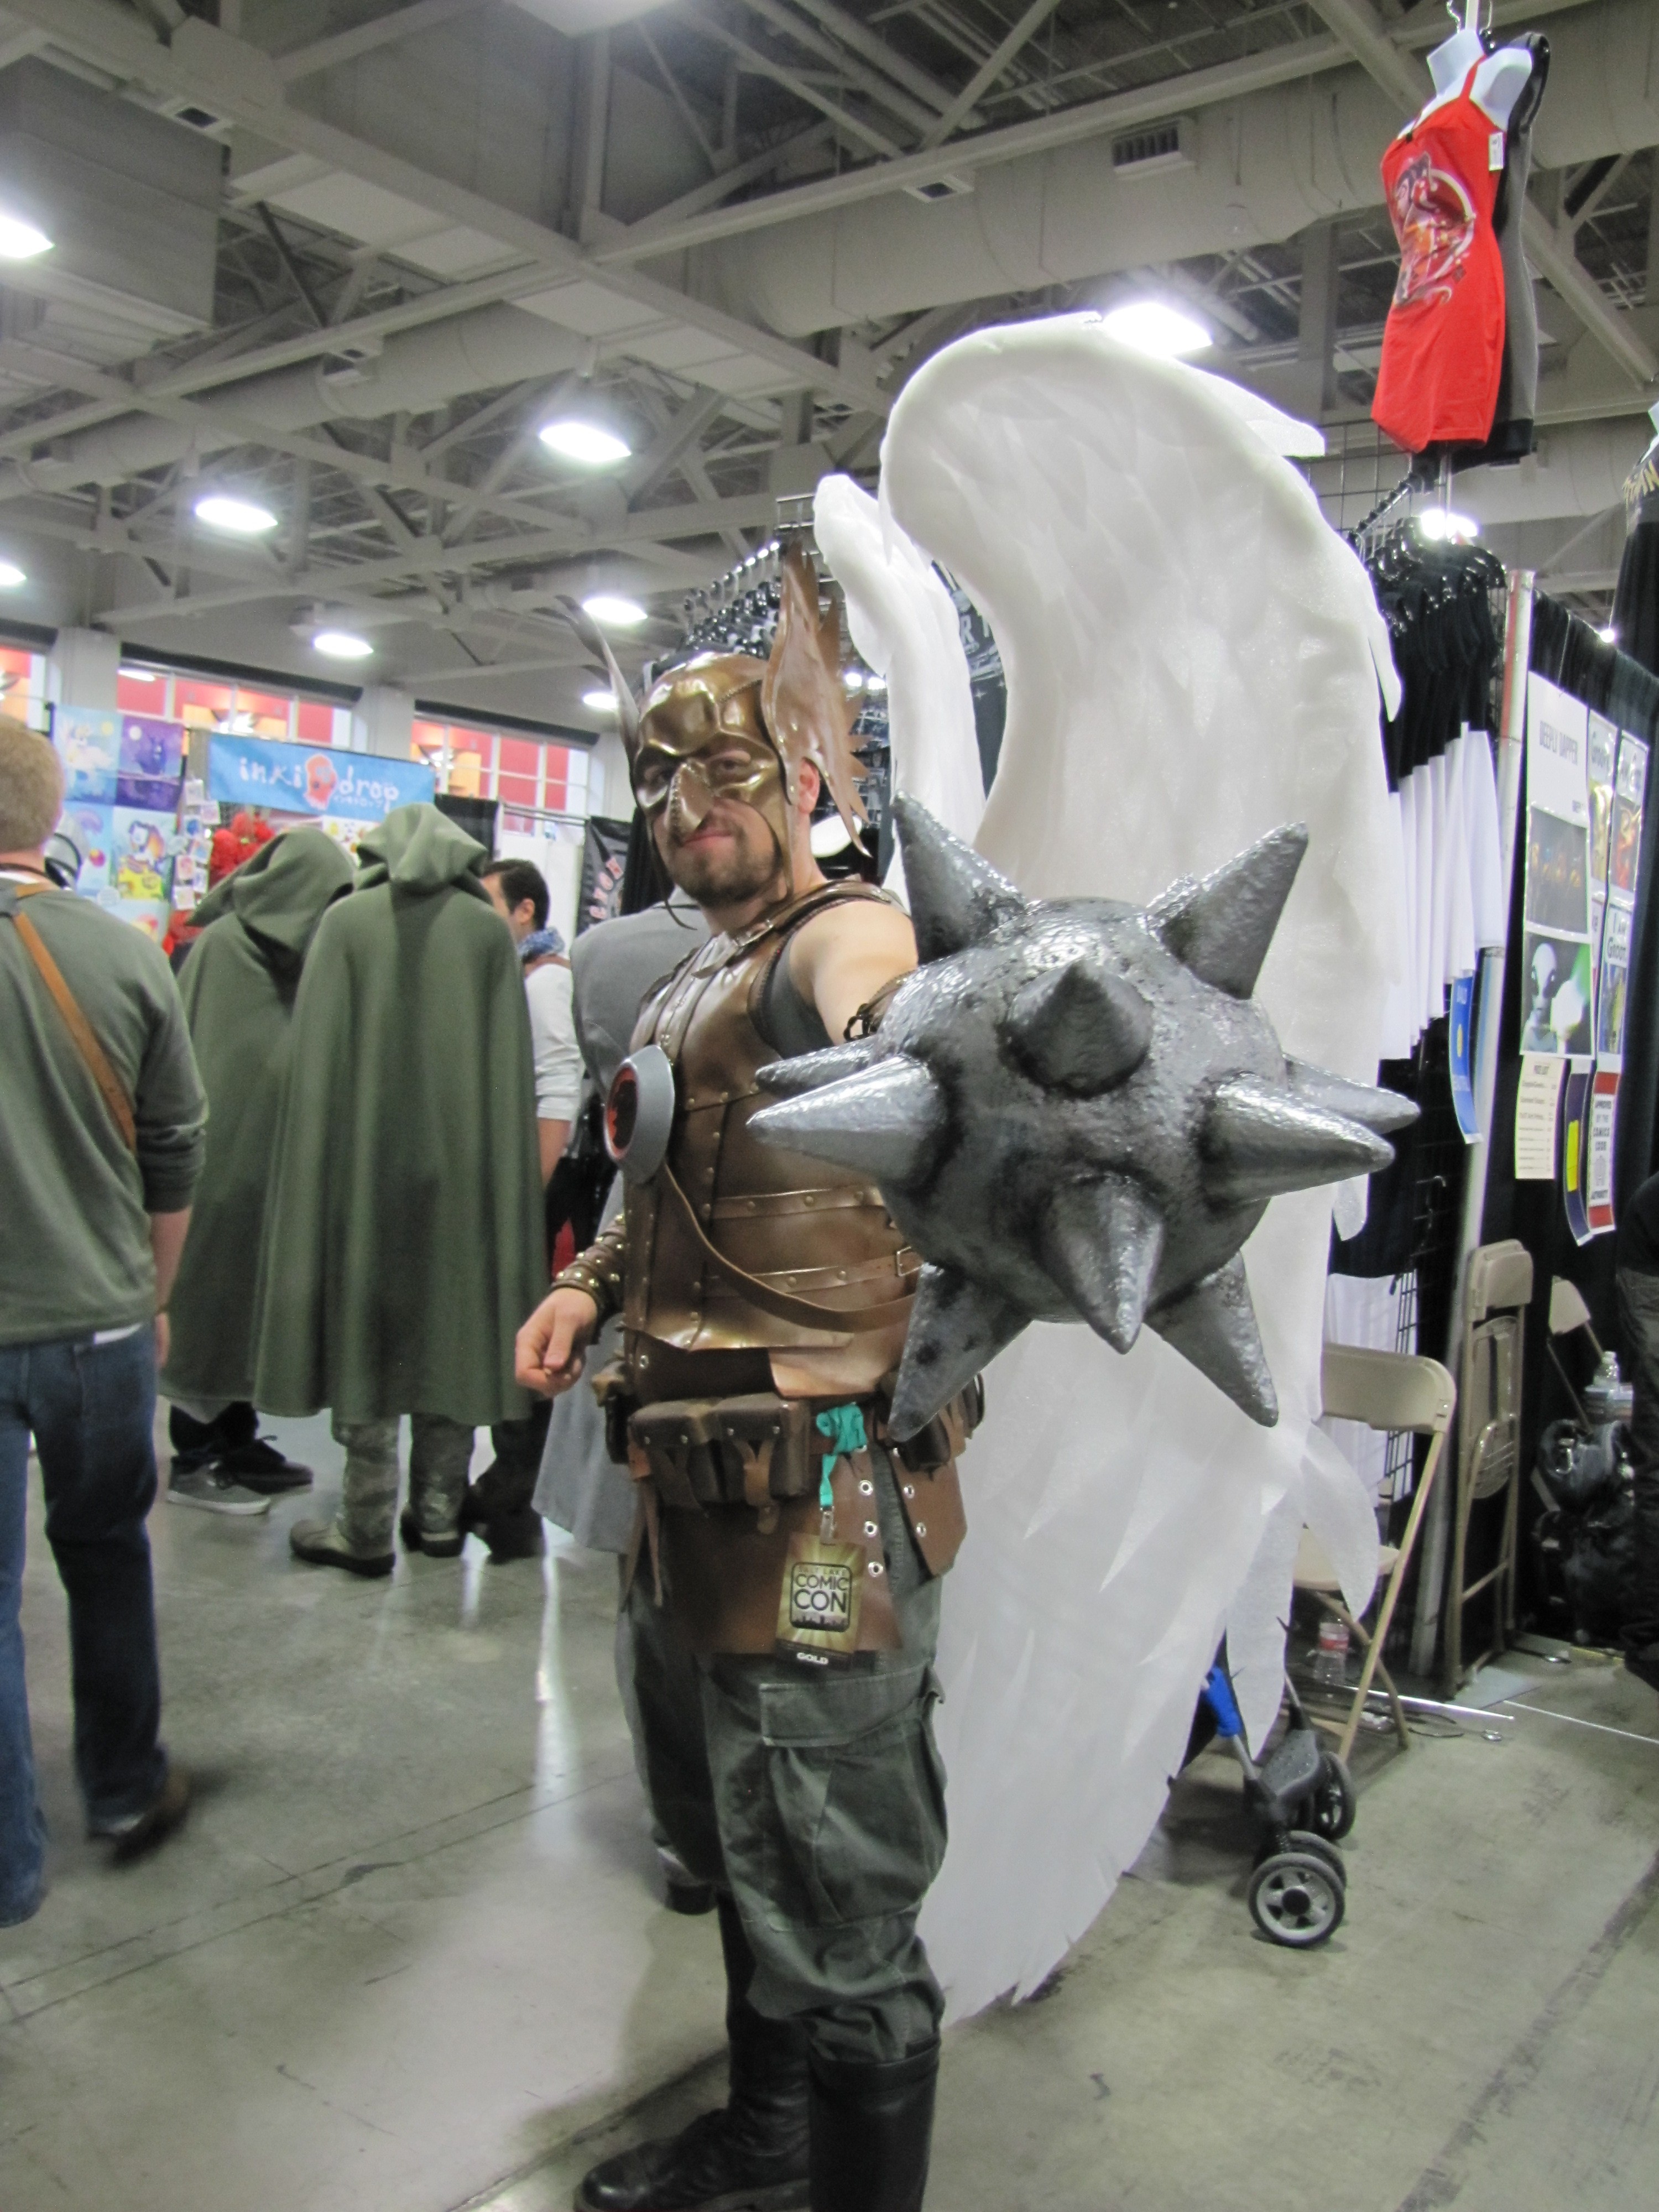 What’s New at Salt Lake Comic Con This Year